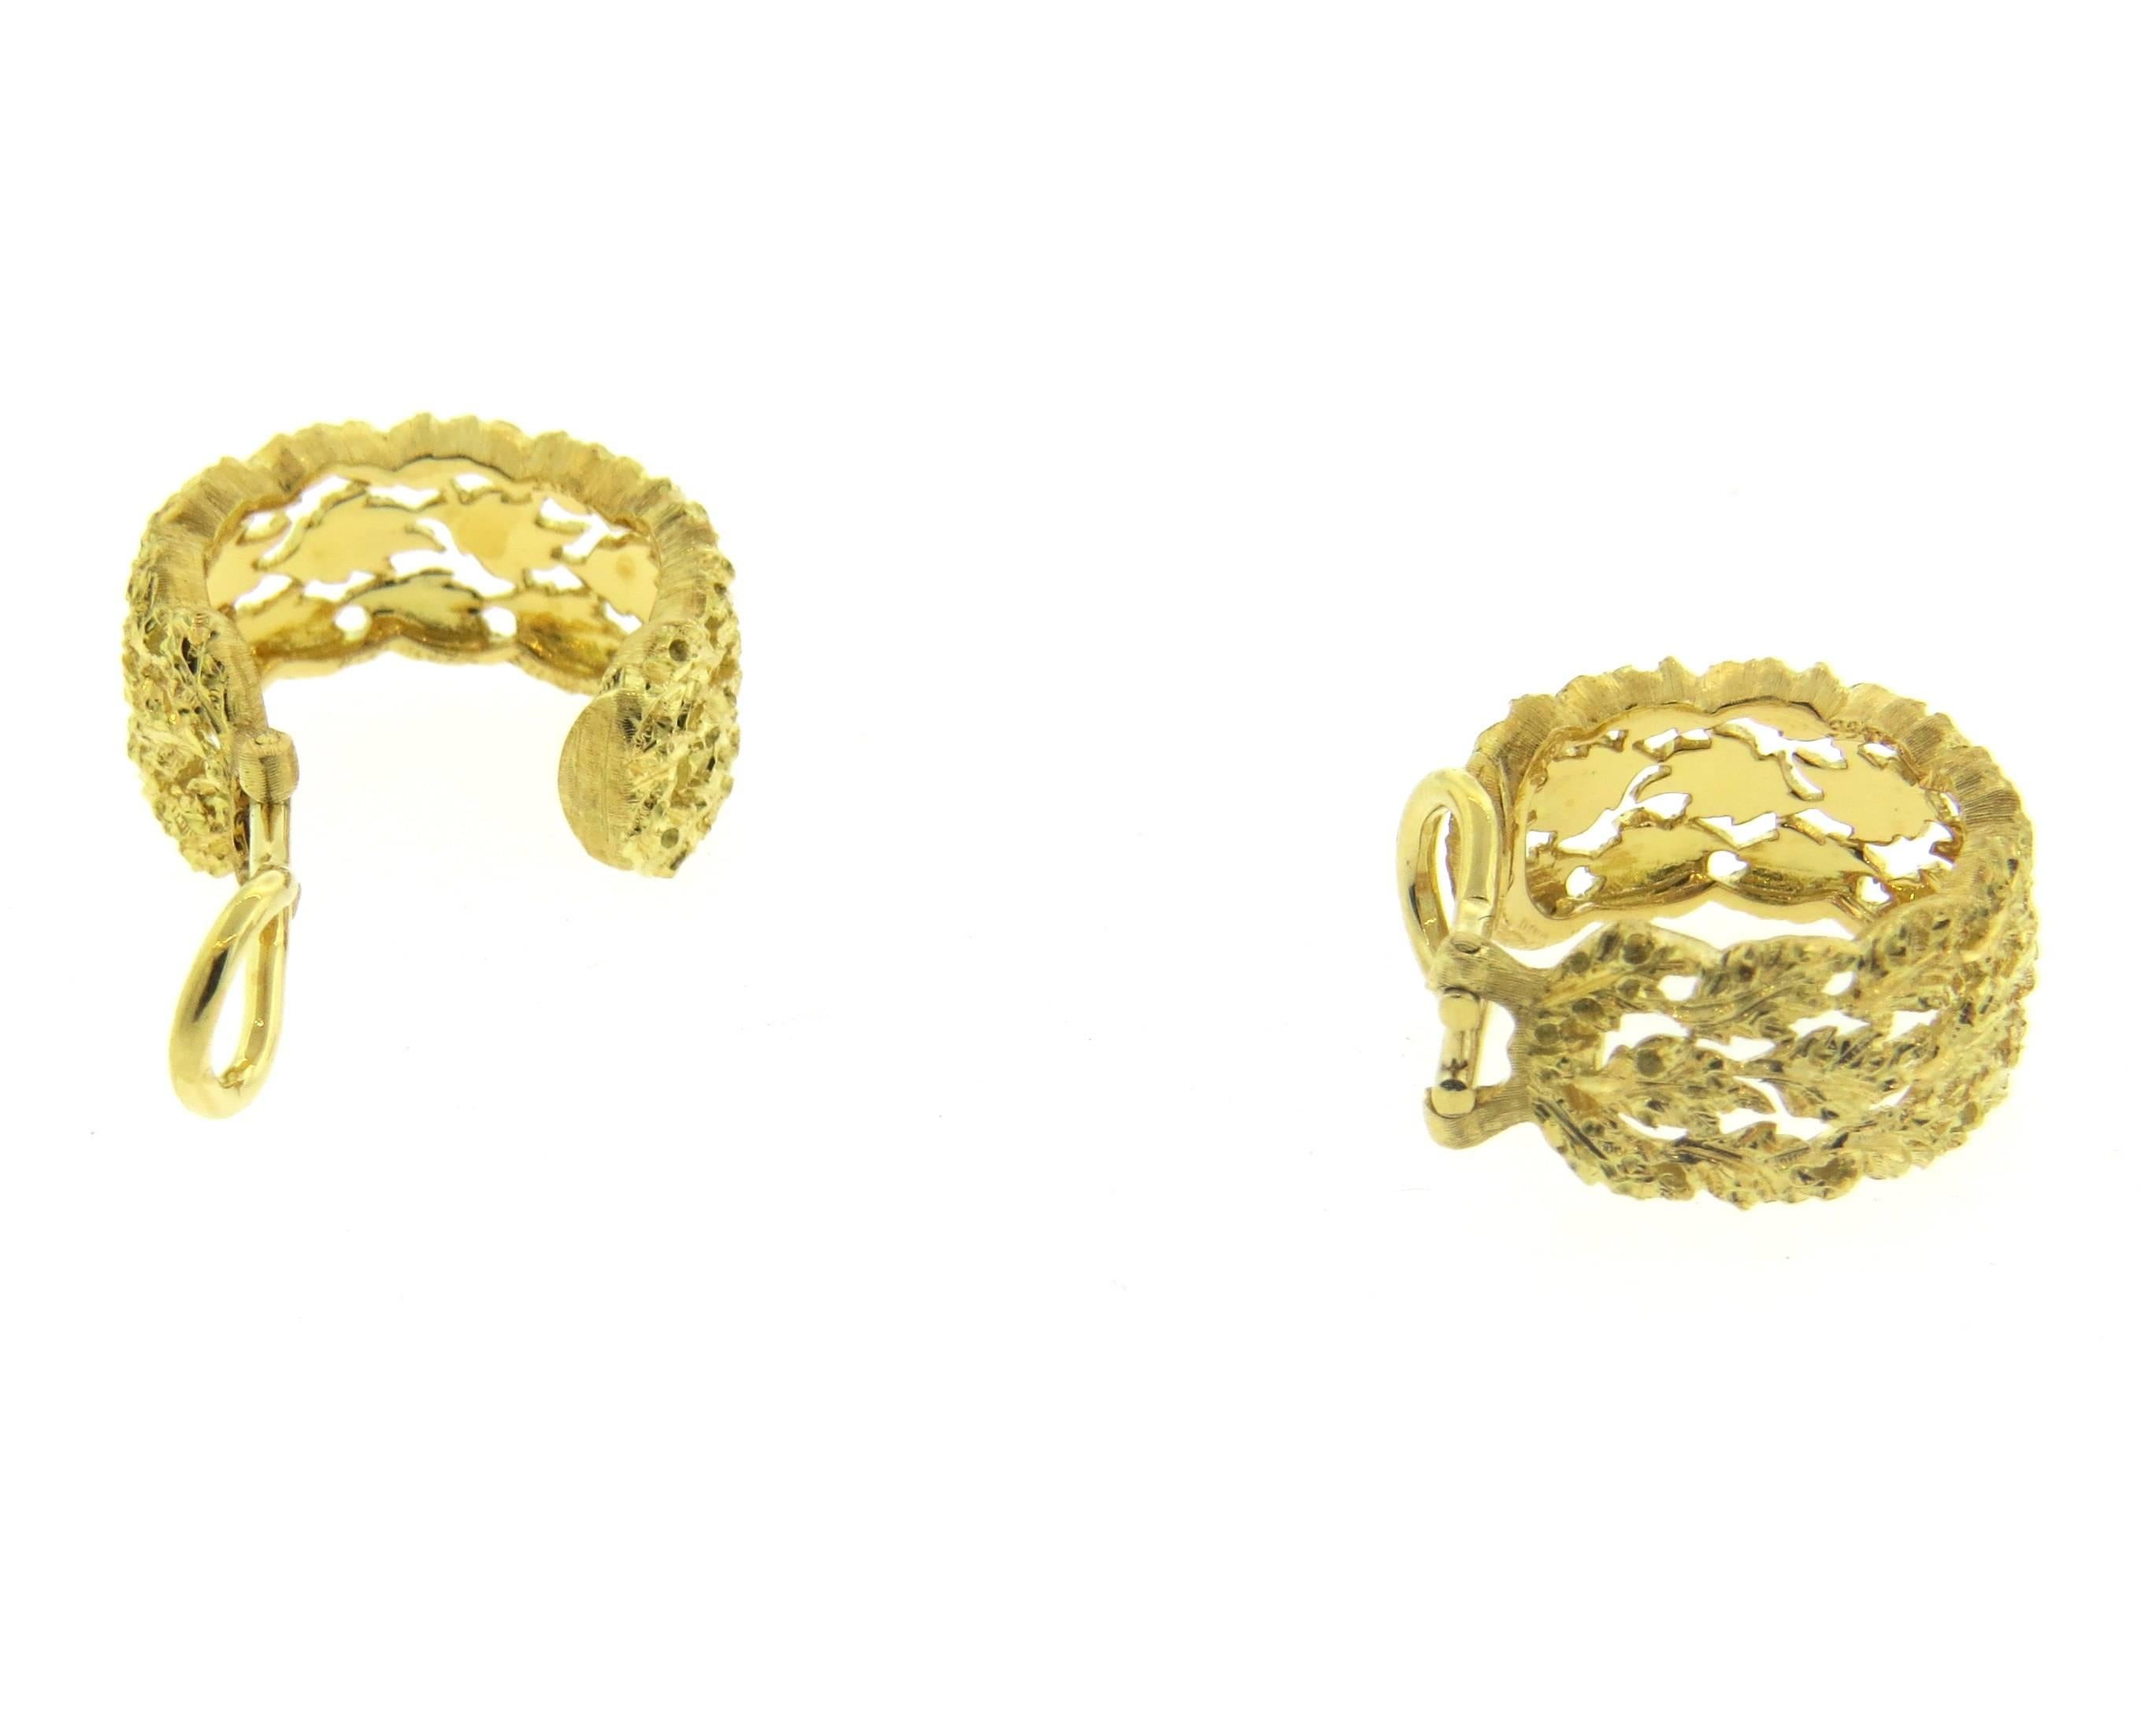 A pair of large 18k yellow gold leaf motif hoop earrings, crafted by Buccellati. Earrings are 20mm in diameter x 9mm wide. Marked:  Buccellati Italy 18k. Weight - 10.9 grams 